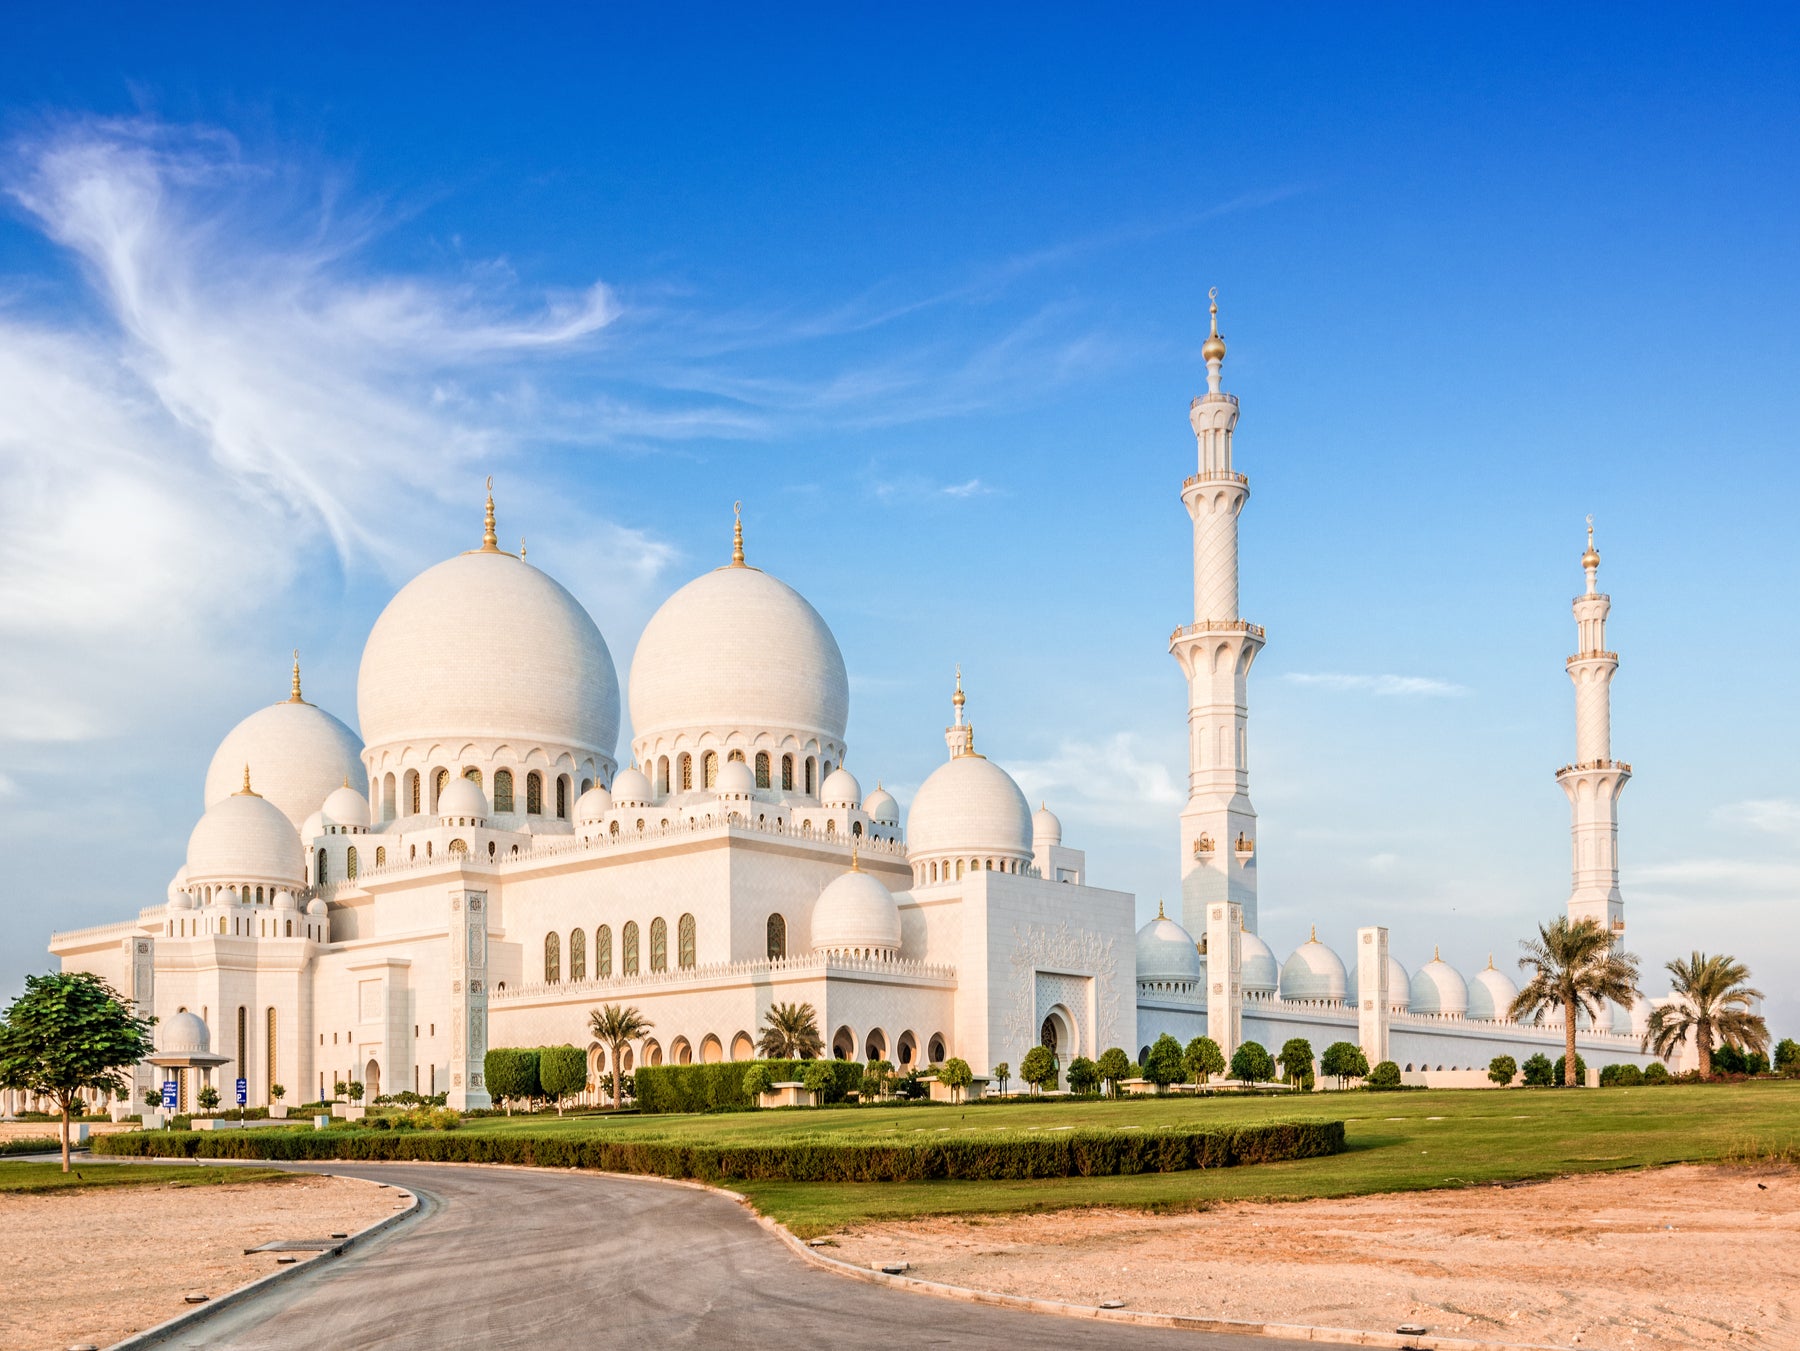 Sheikh Zayed Grand Mosque, the largest mosque in Abu Dhabi, is an architecural icon